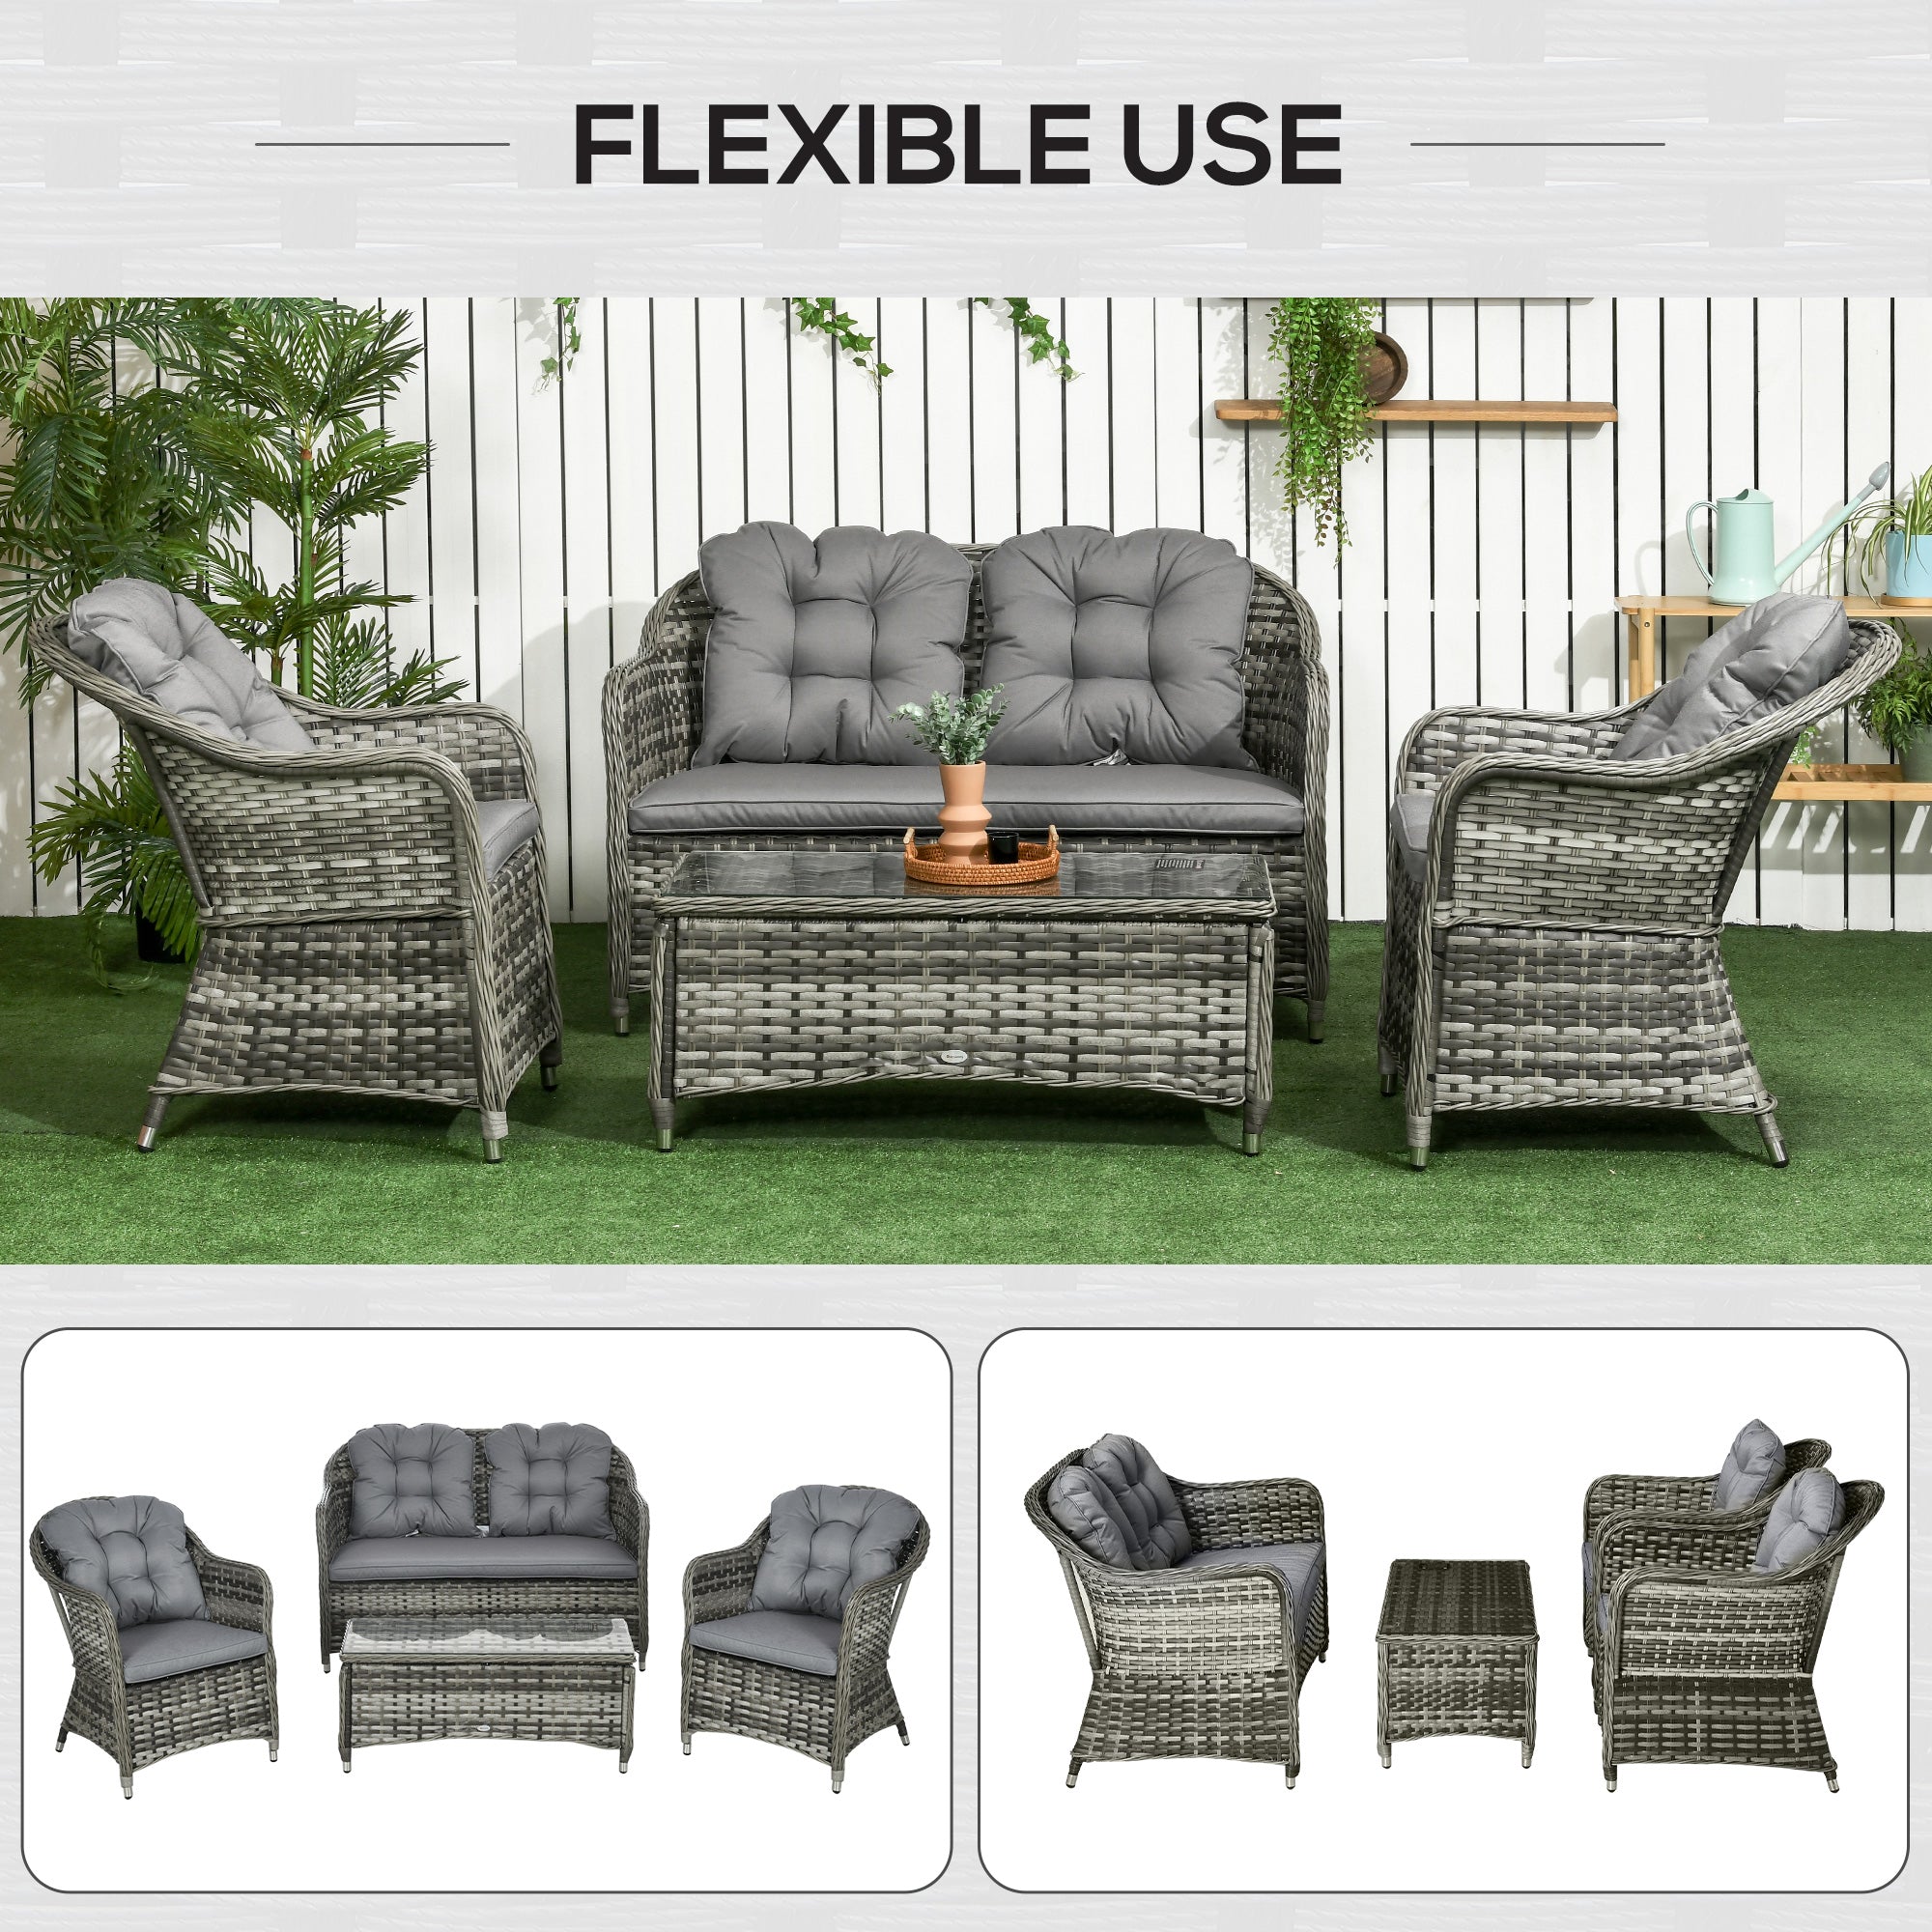 Outsunny 4 Pieces PE Rattan Wicker Sofa Set Outdoor Conservatory Furniture Lawn Patio Coffee Table w/ Cushion - Grey